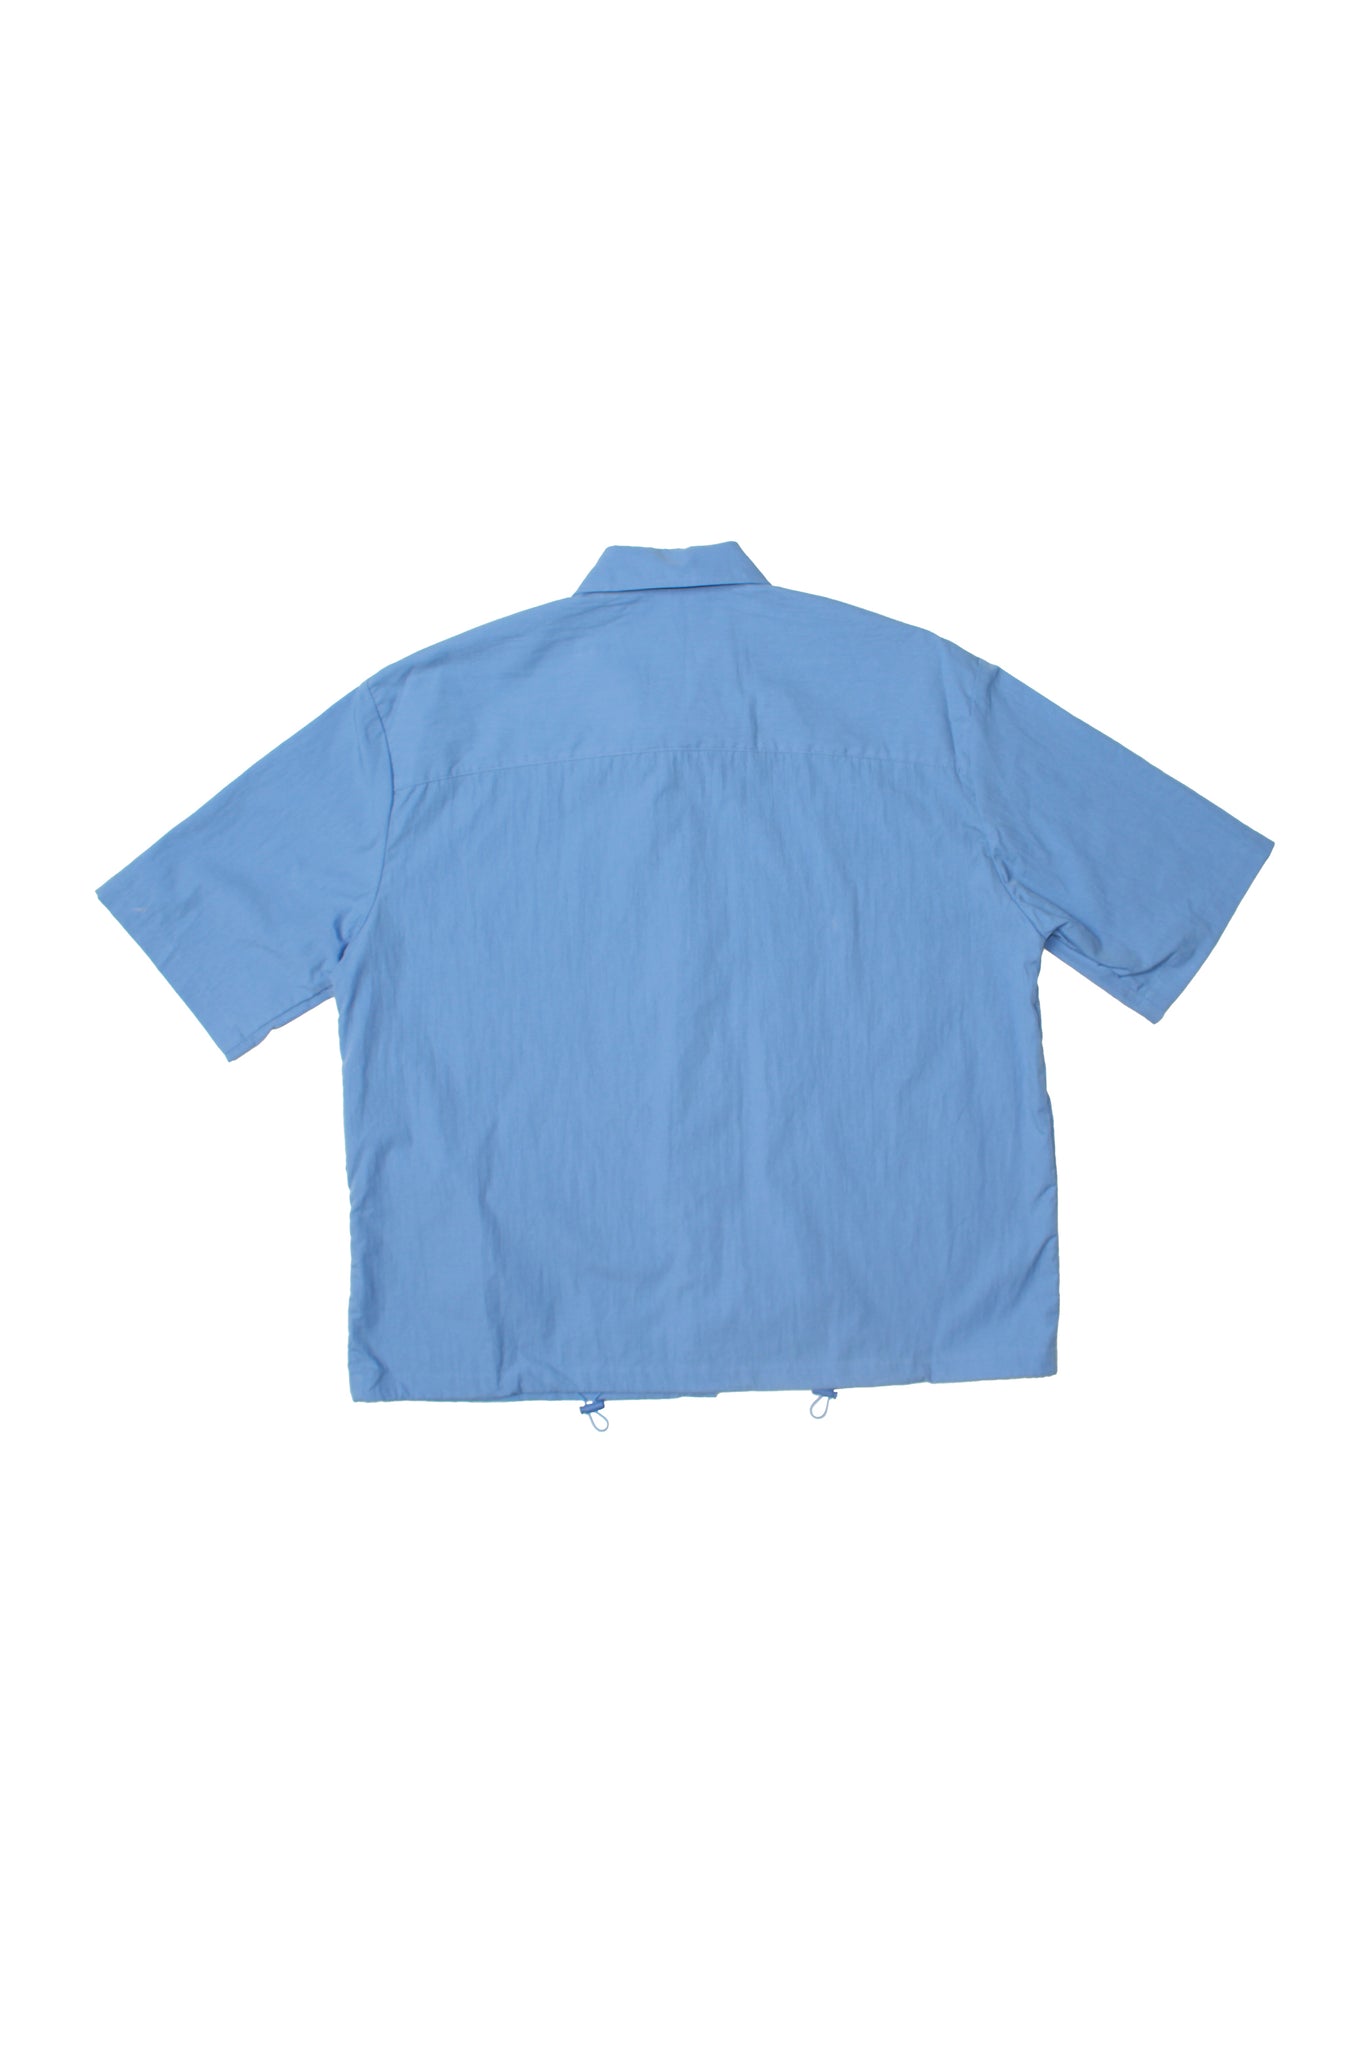 Two Pocket String Shirts in Blue